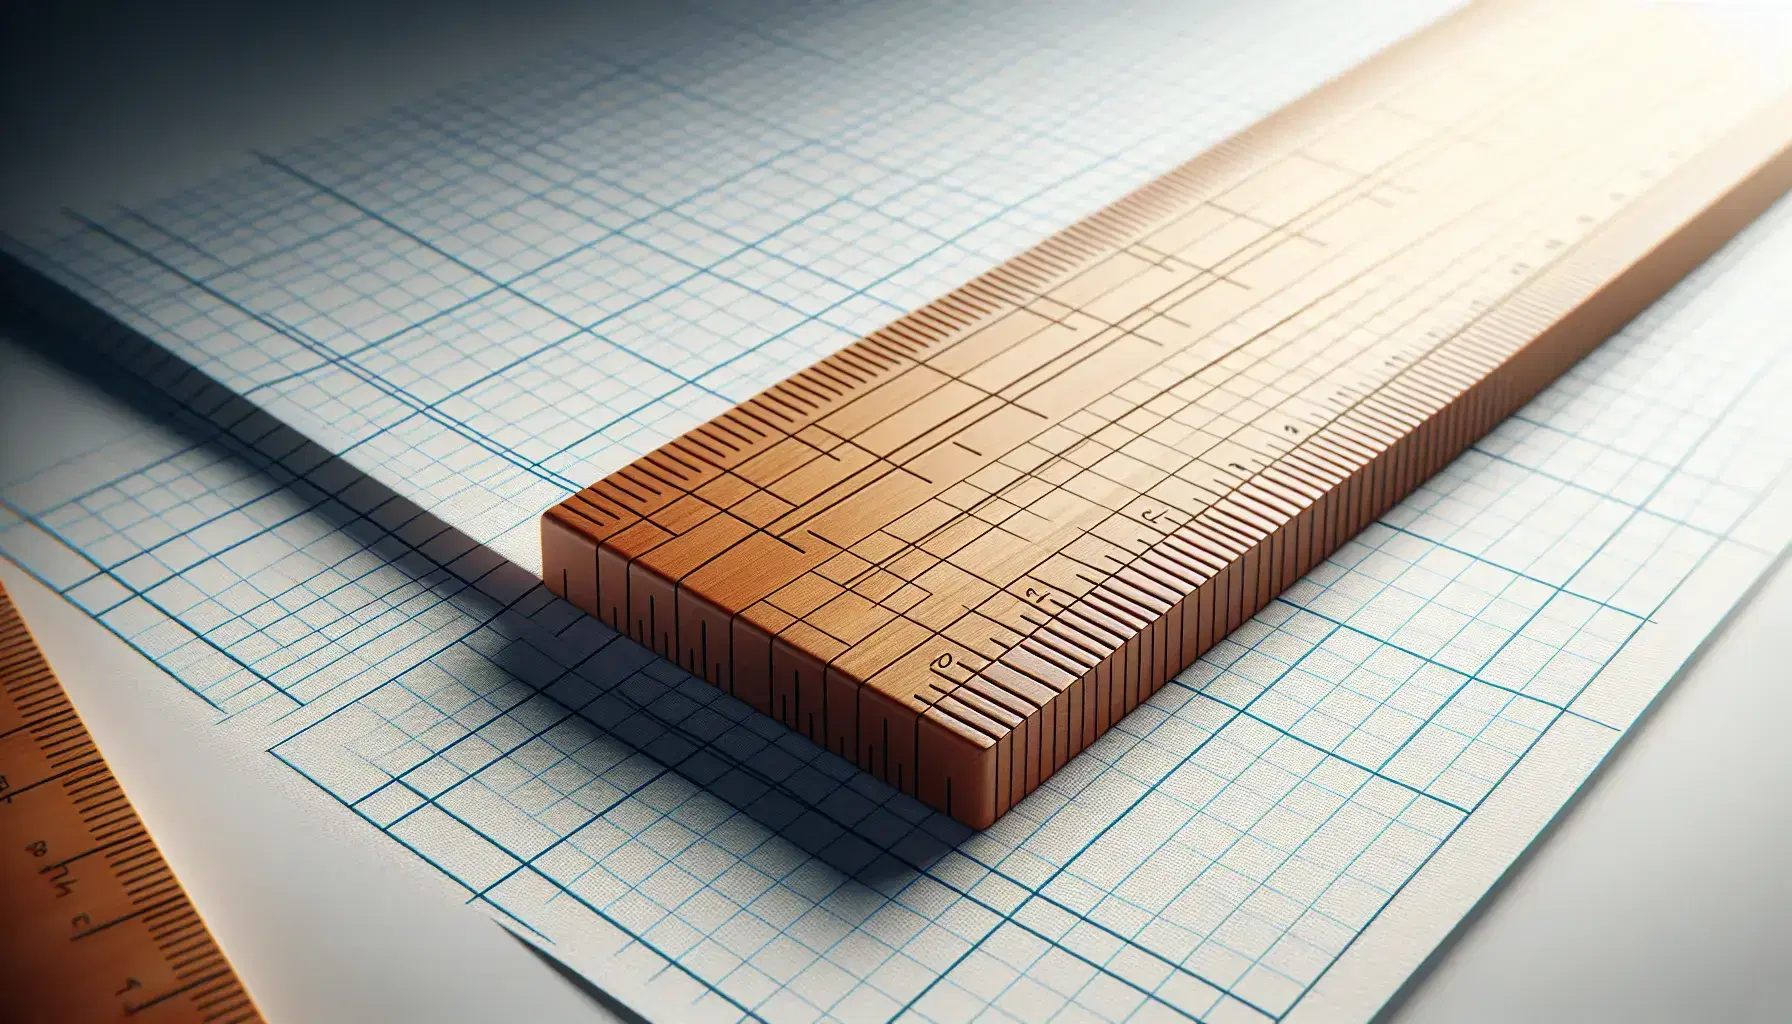 Close-up view of a light brown wooden ruler diagonally placed on white graph paper with blue grid lines, creating trapezoidal shapes.